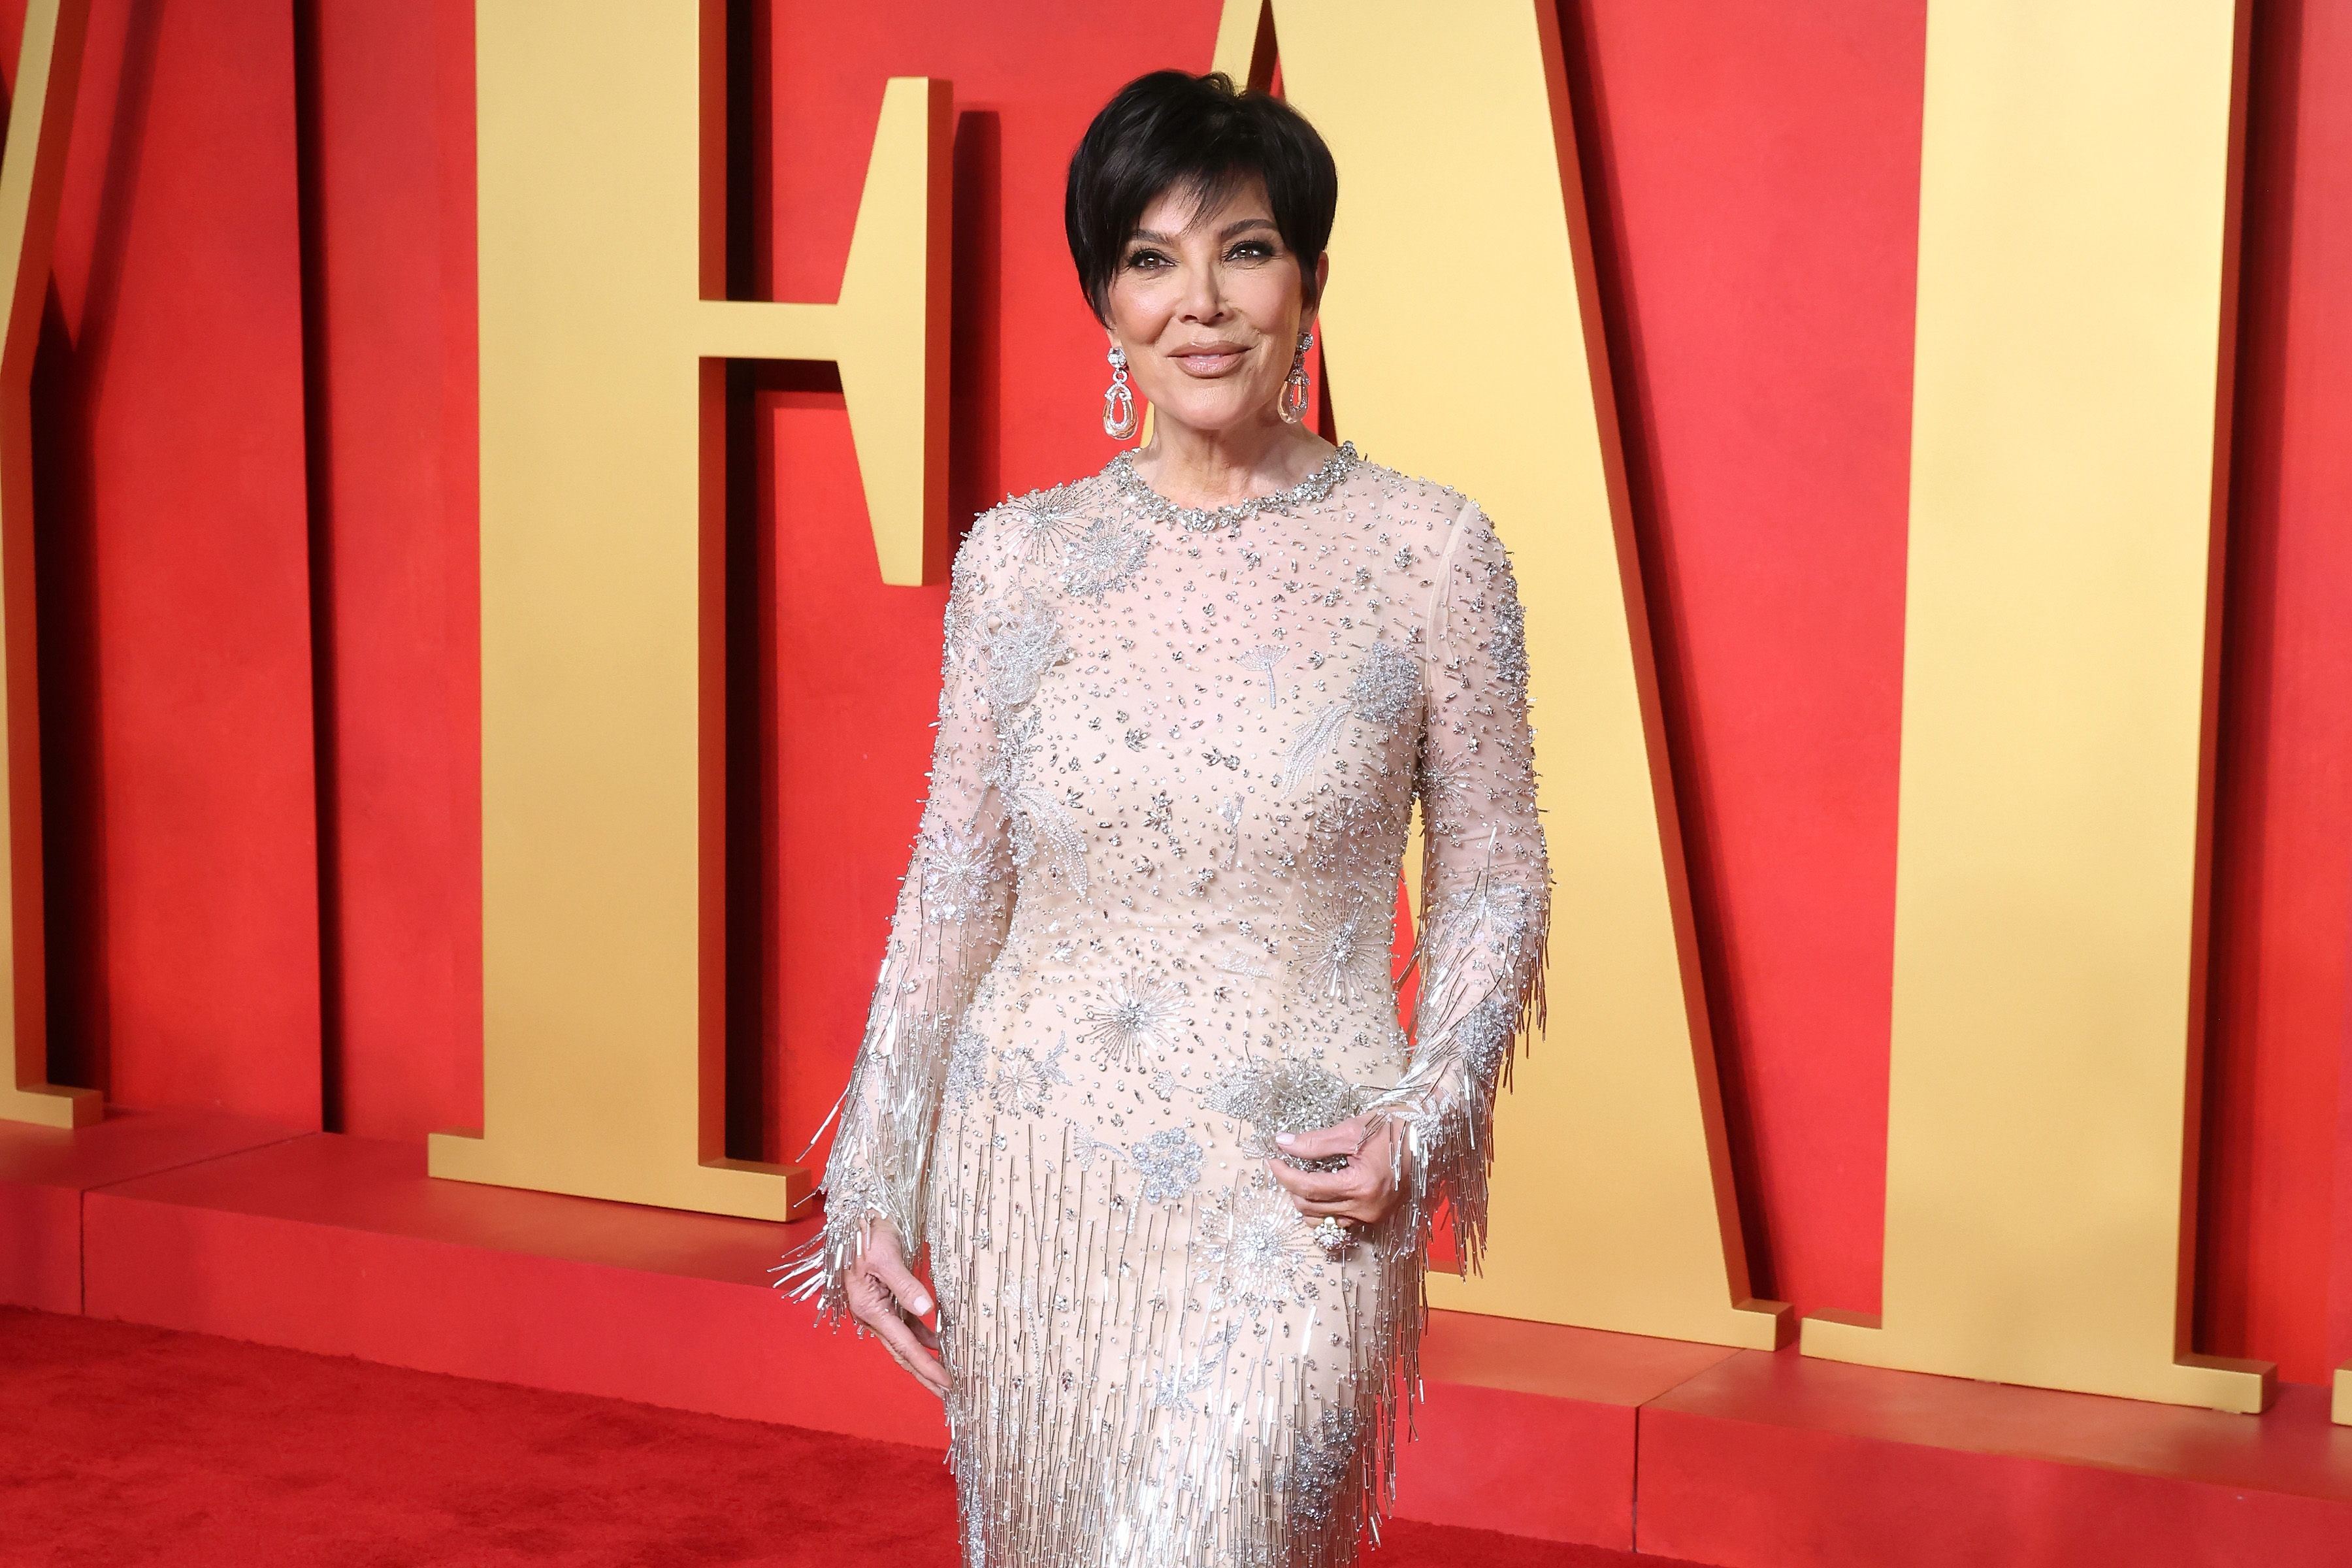 Kris Jenner in an embellished long-sleeve gown with fringe details posing on the red carpet